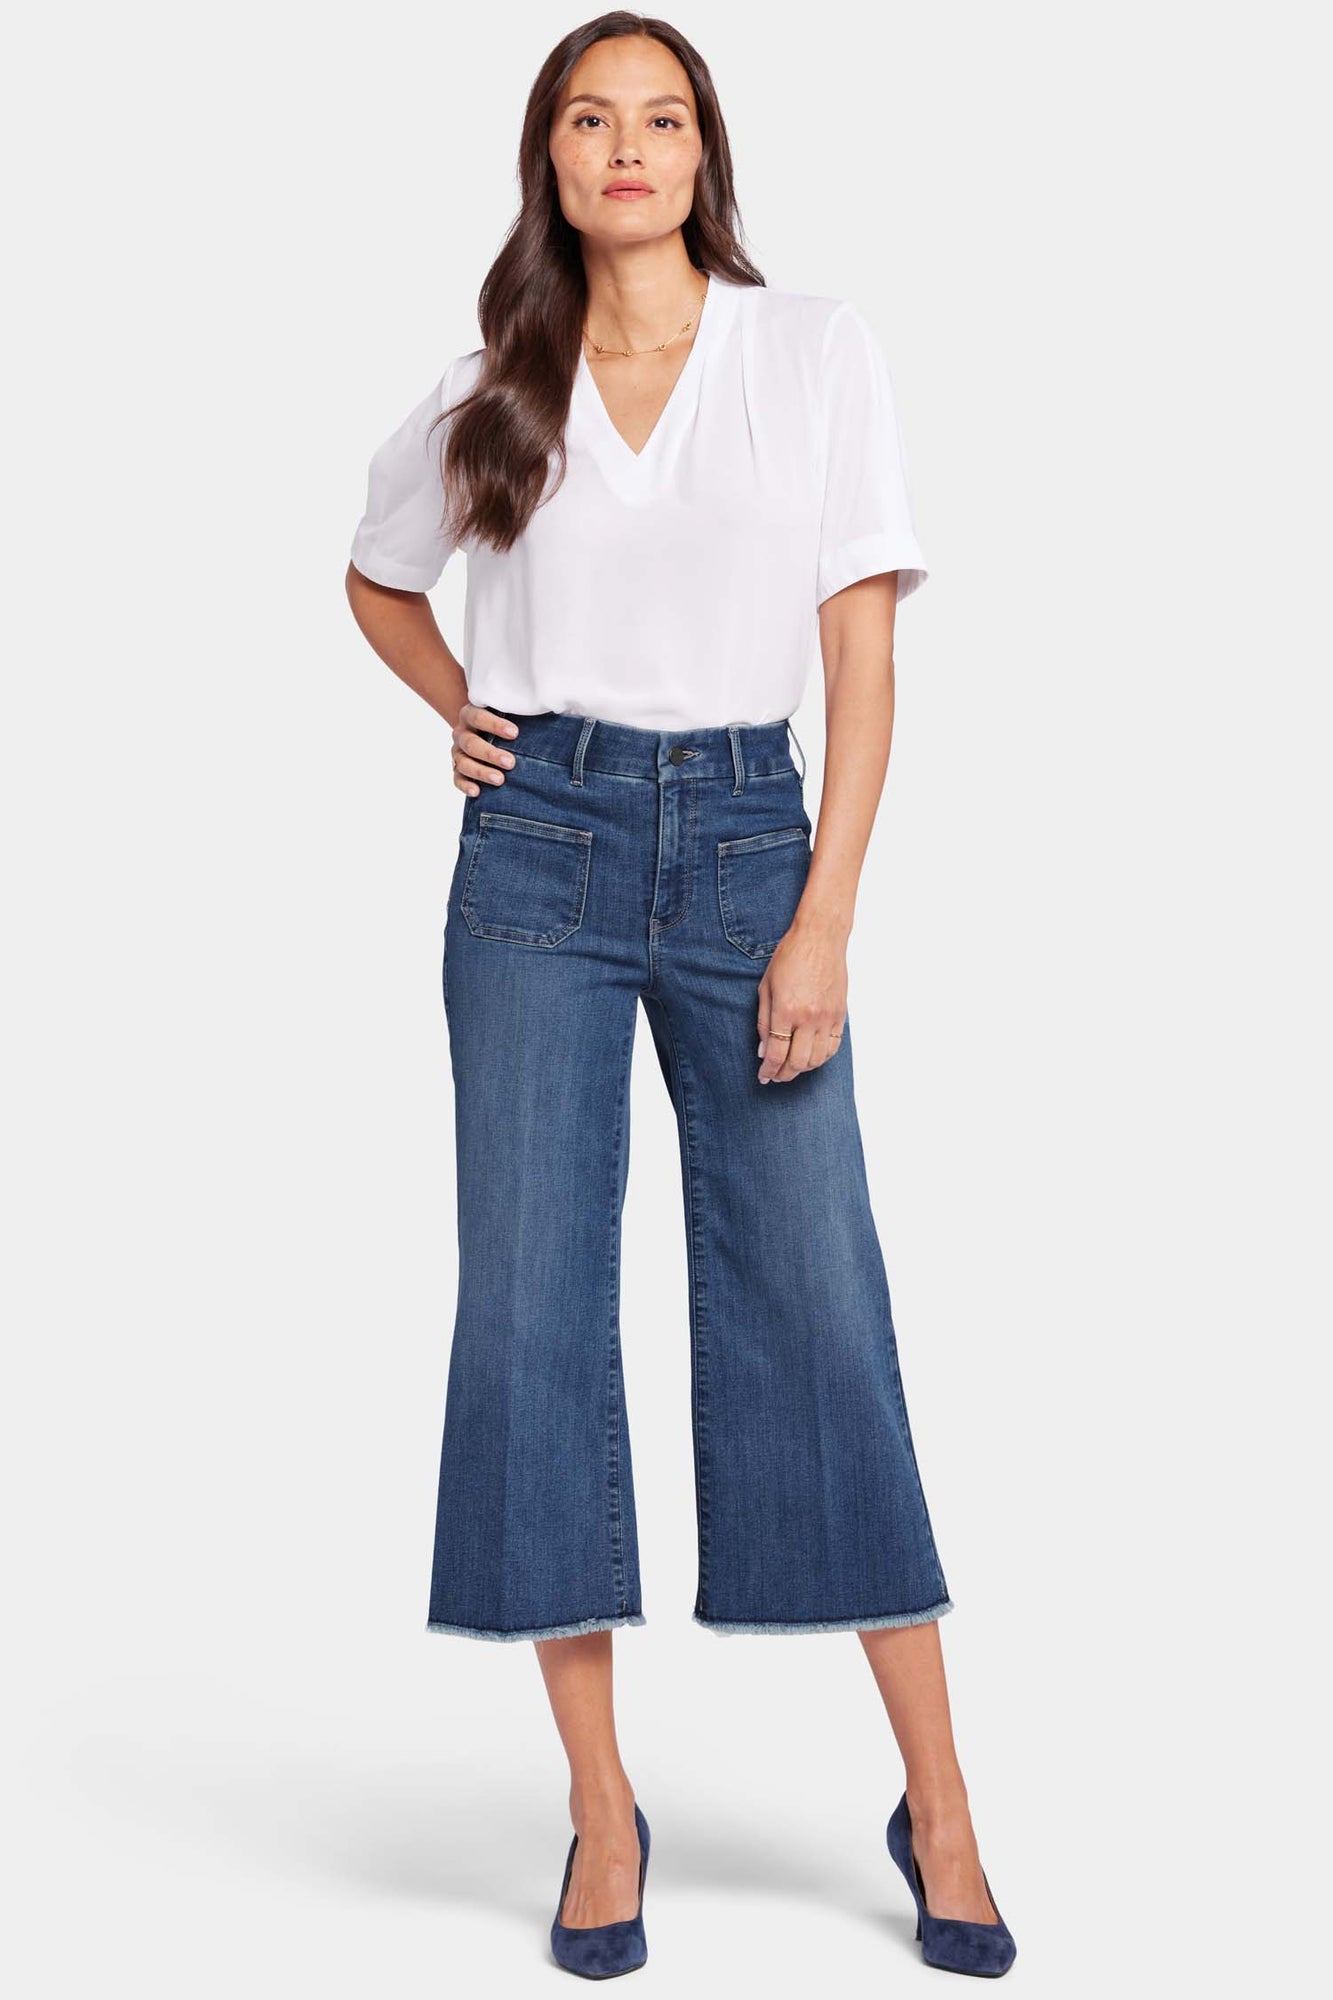 NYDJ Patchie Wide Leg Capri Jeans In Petite With Frayed Hems - Fanciful